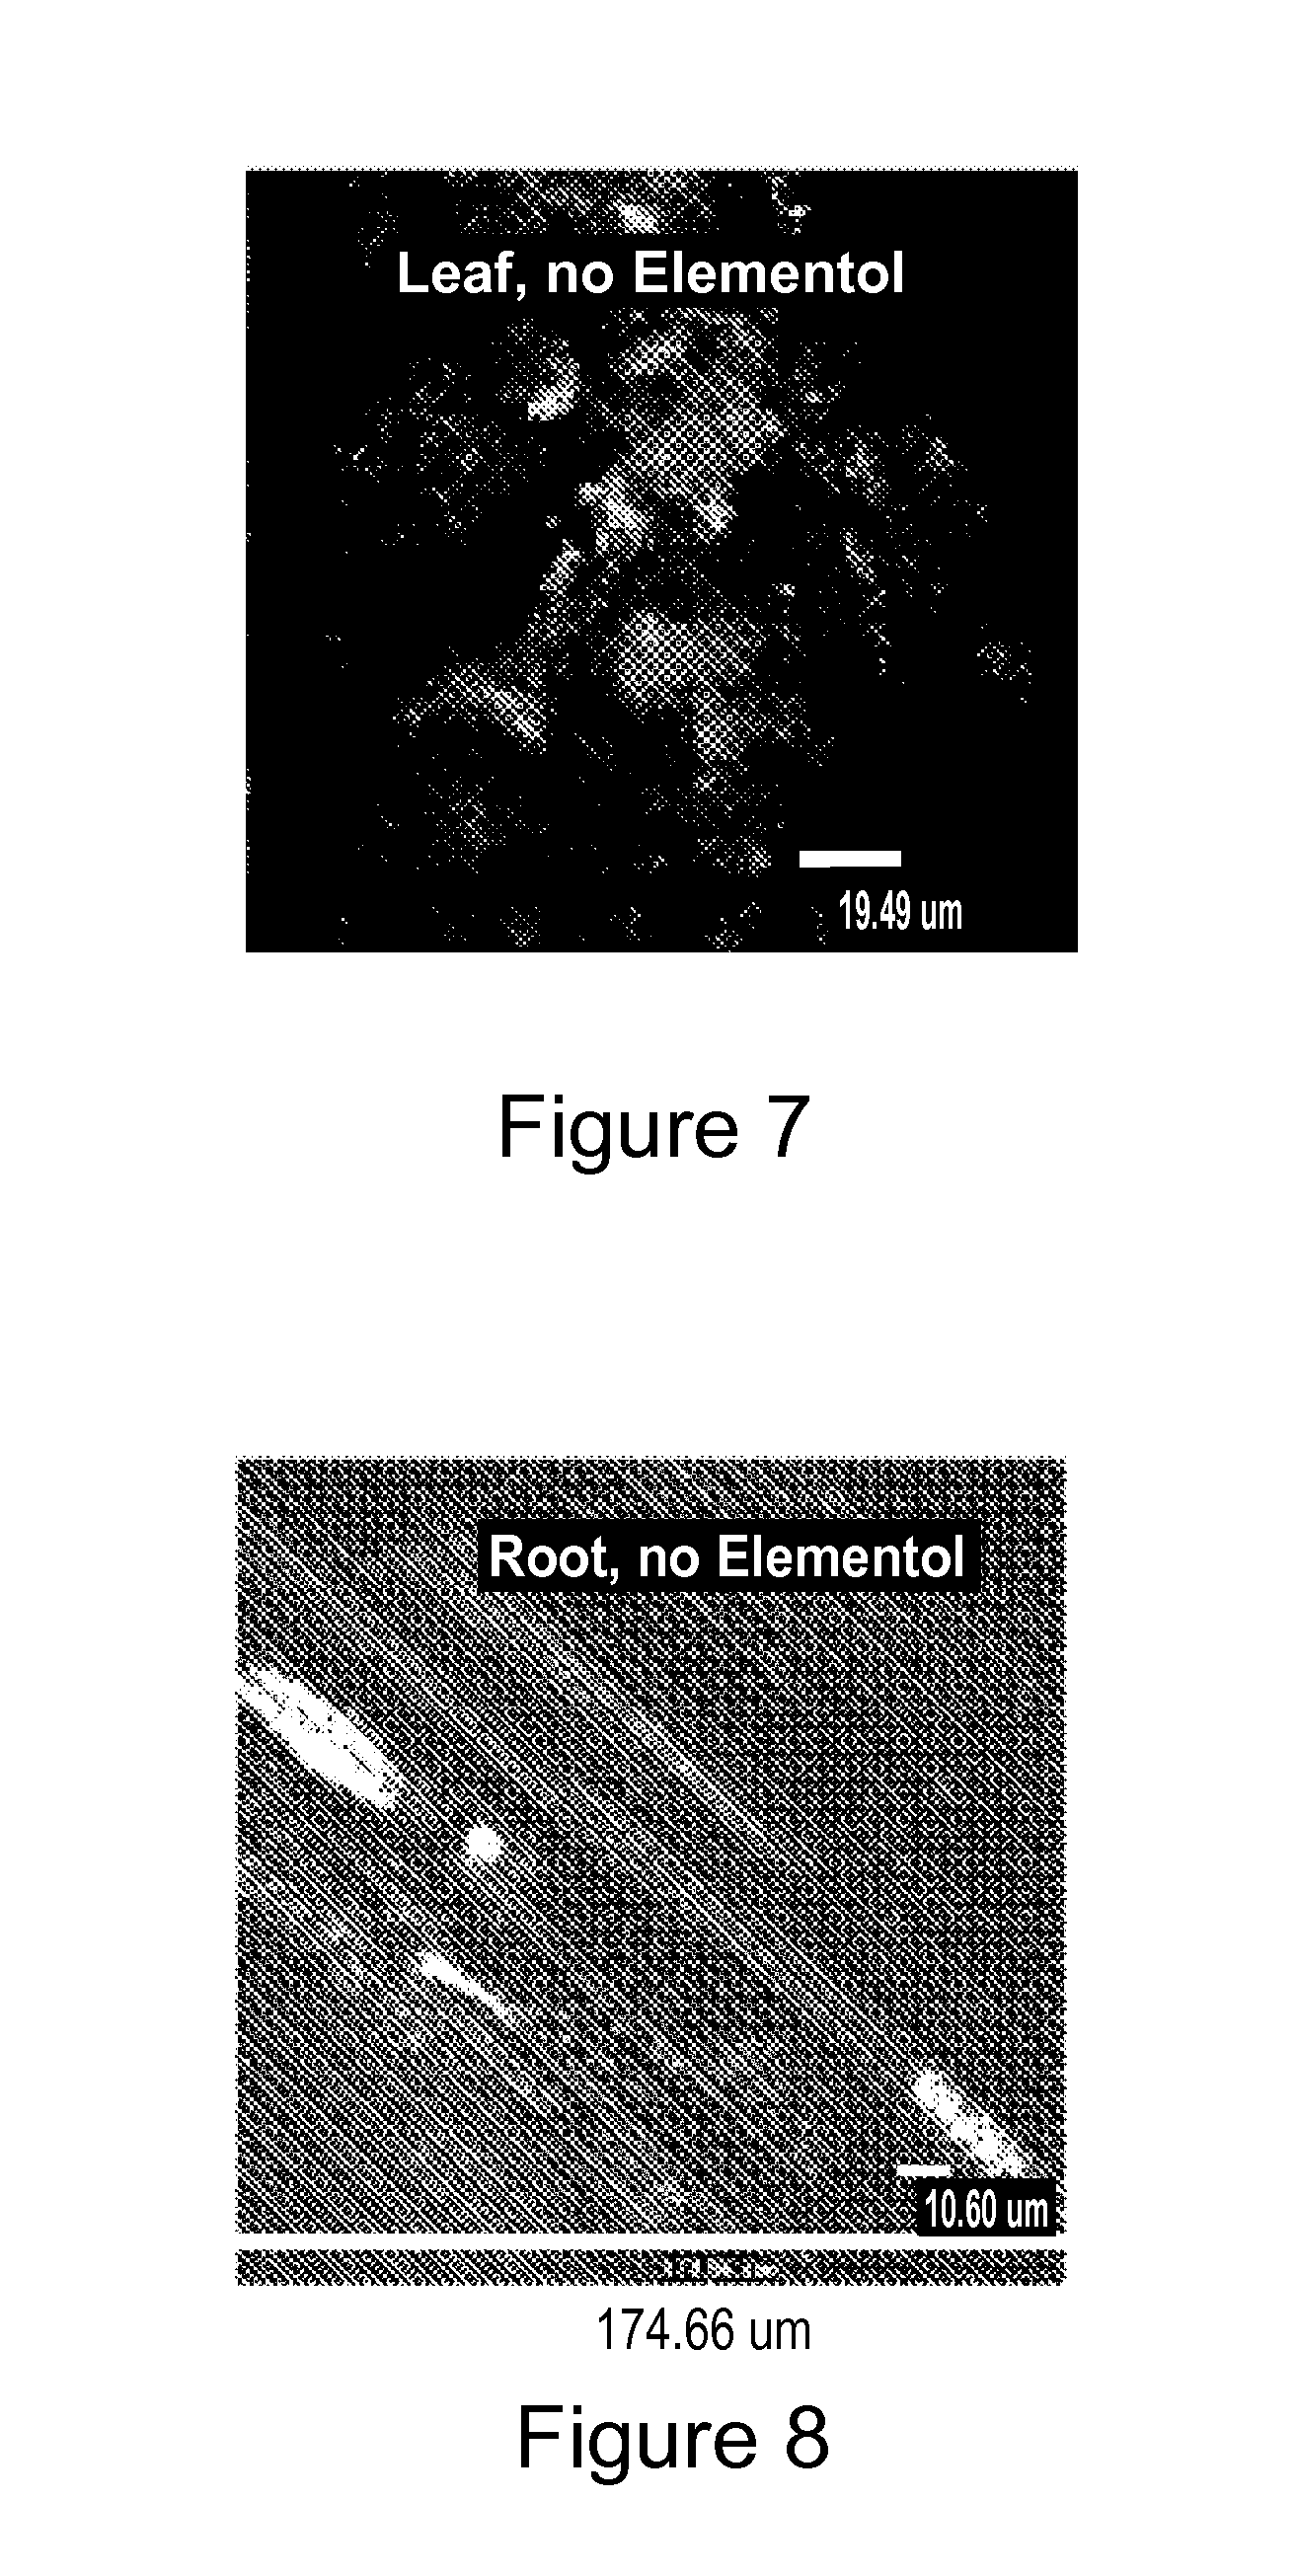 Plant support formulation, vehicle for the delivery and translocation of phytologically beneficial substances and compositions containing same